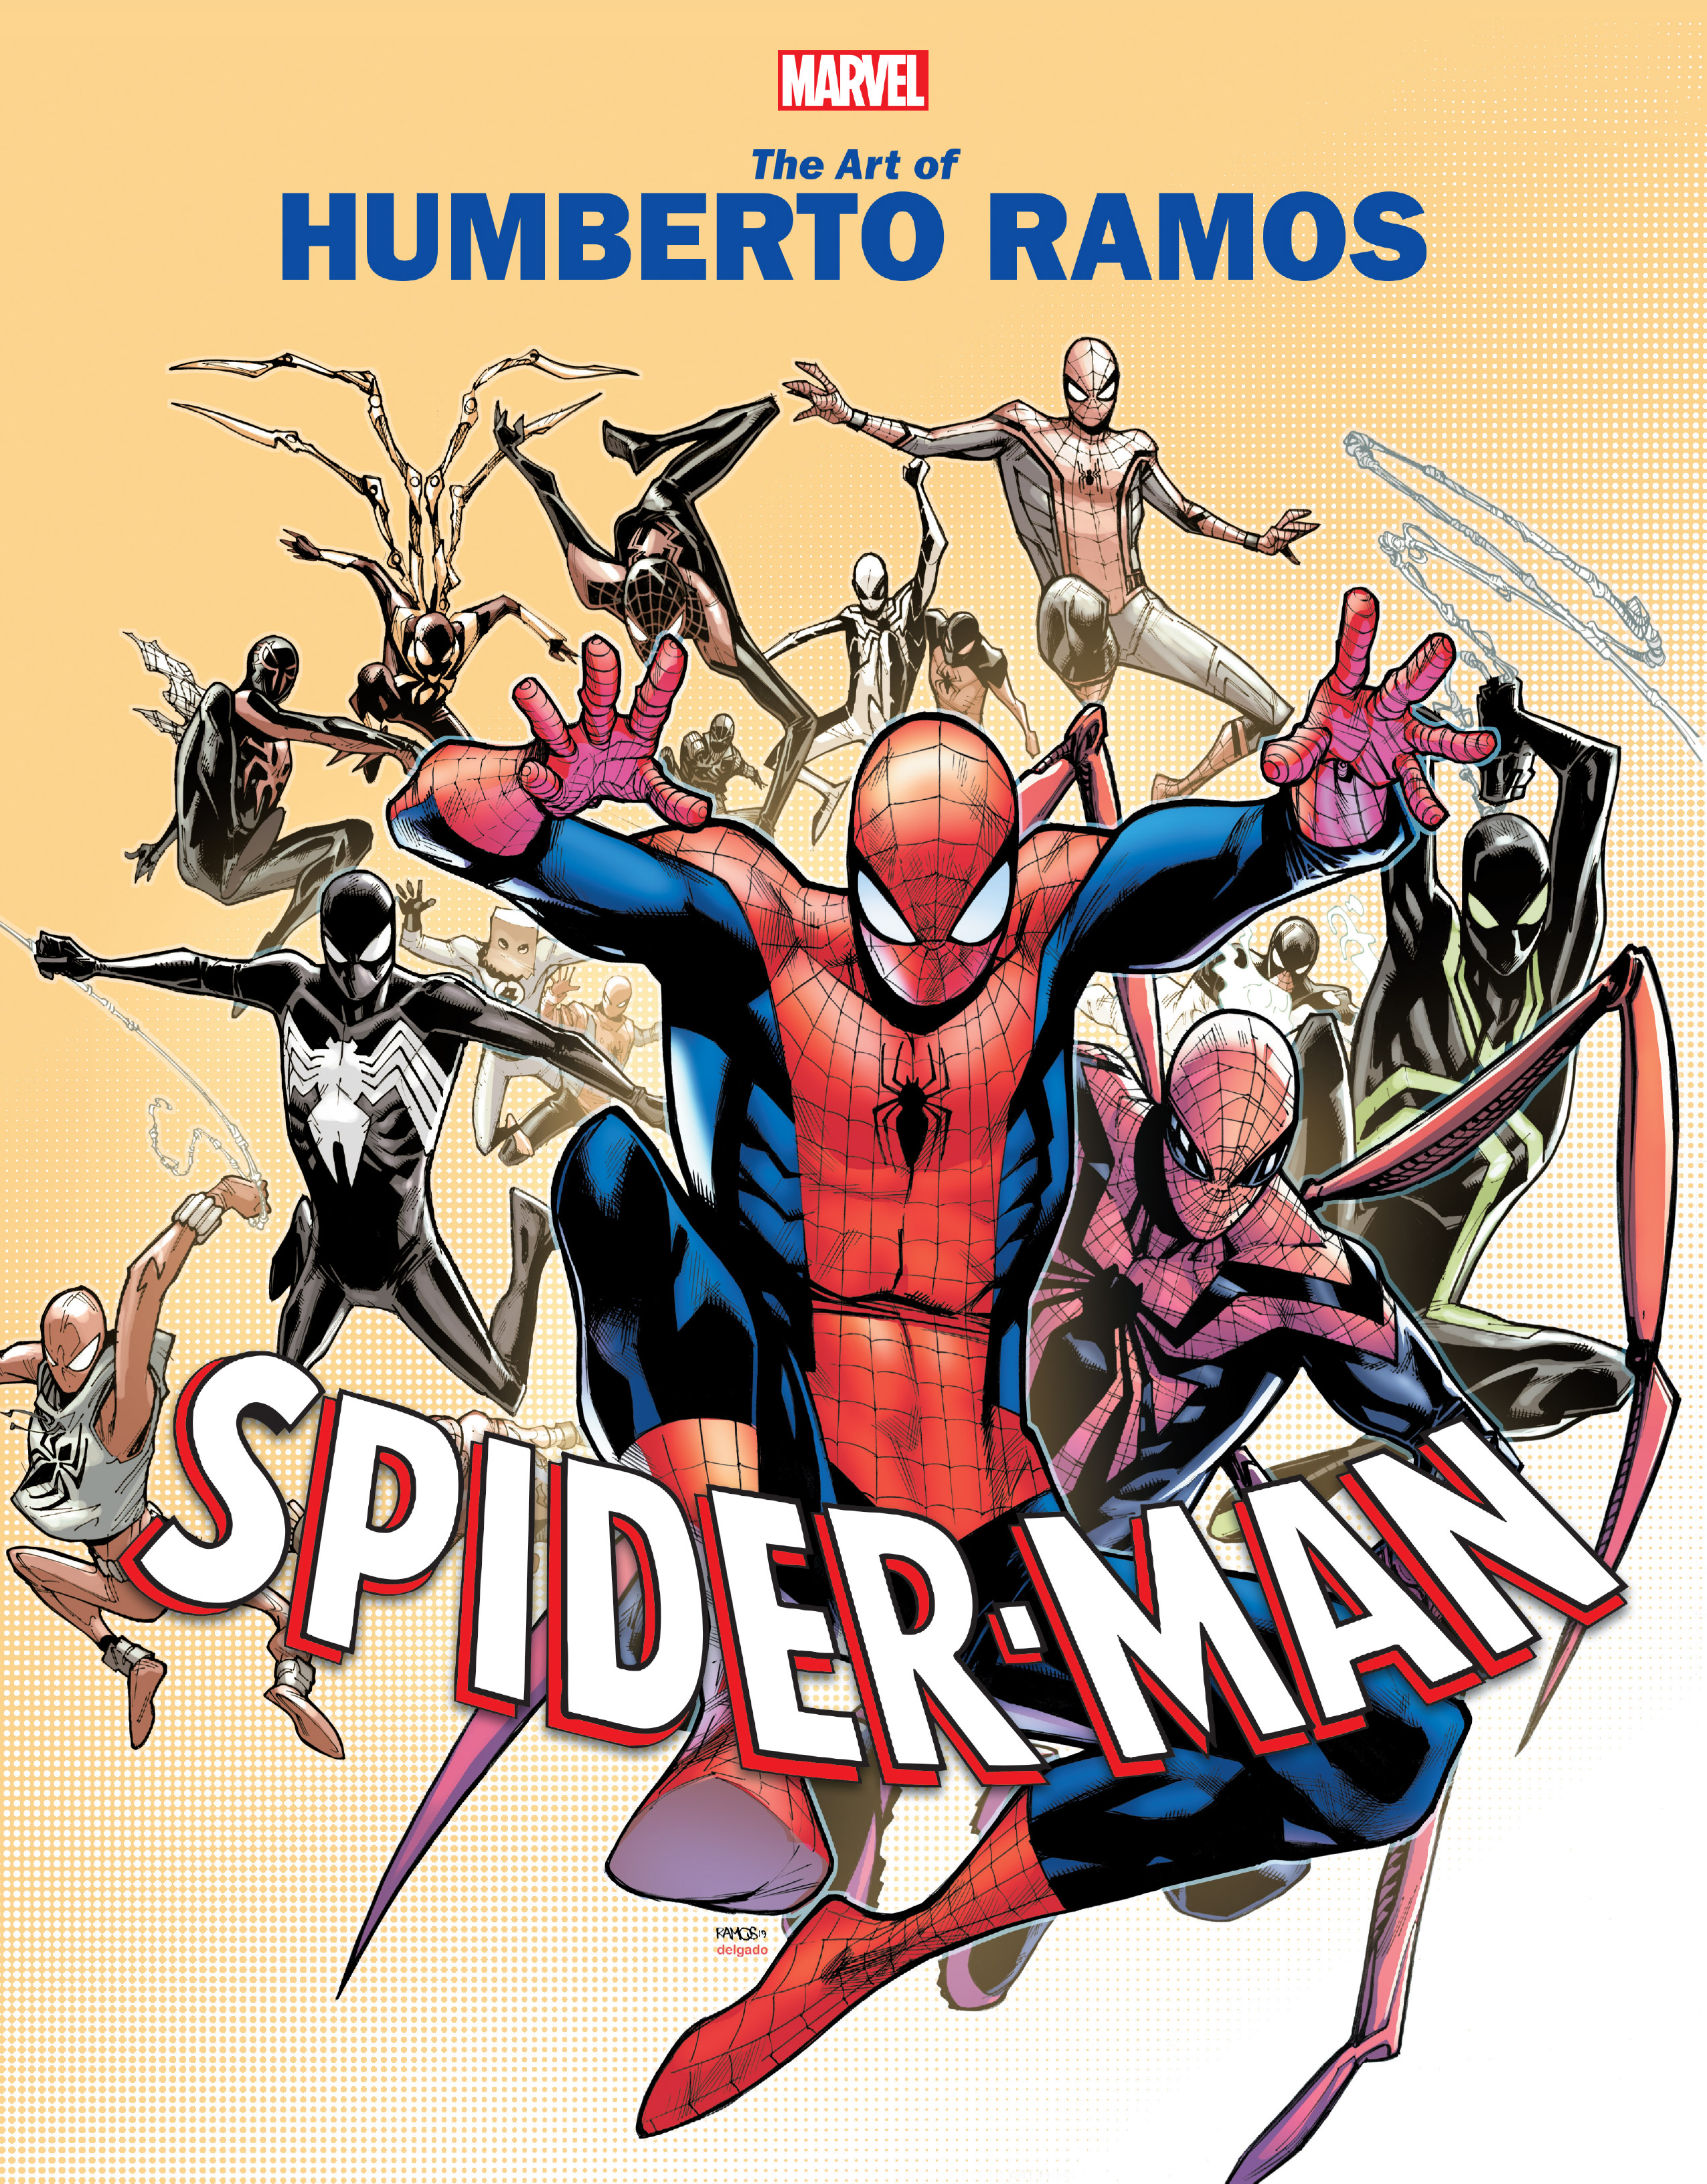 Read online Marvel Monograph: The Art of Humberto Ramos: Spider-Man comic -  Issue # TPB - 1